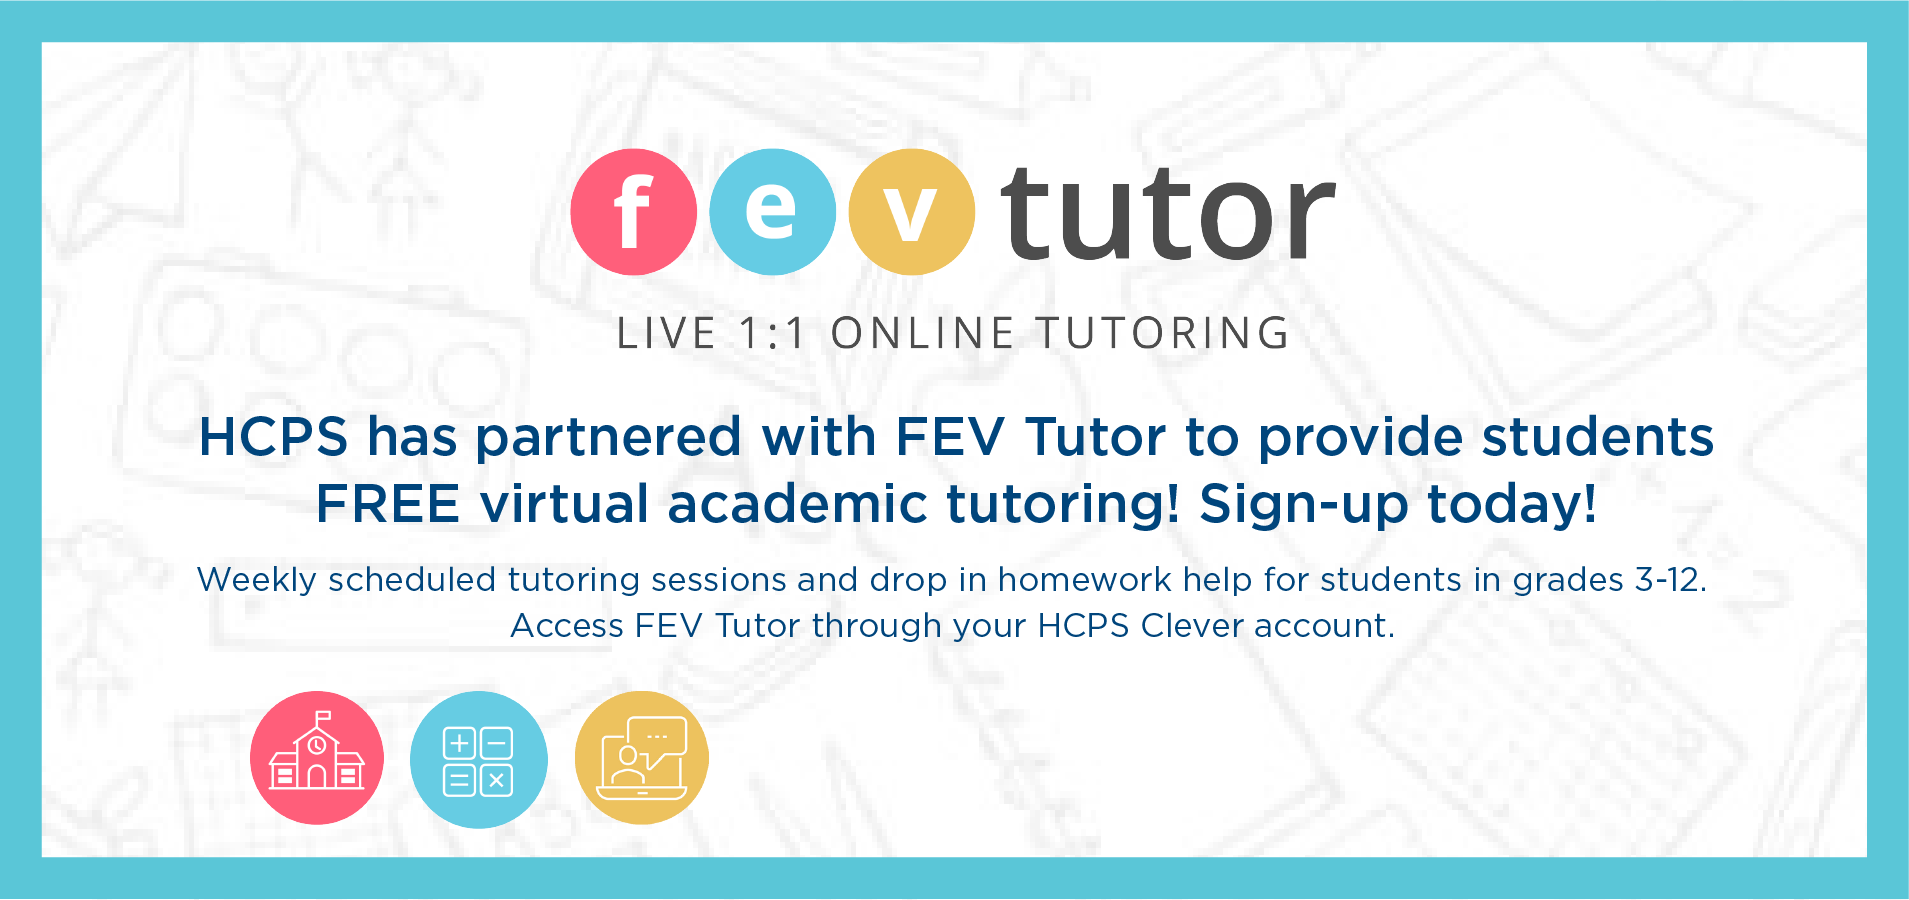 FREE Tutoring Available for Students!